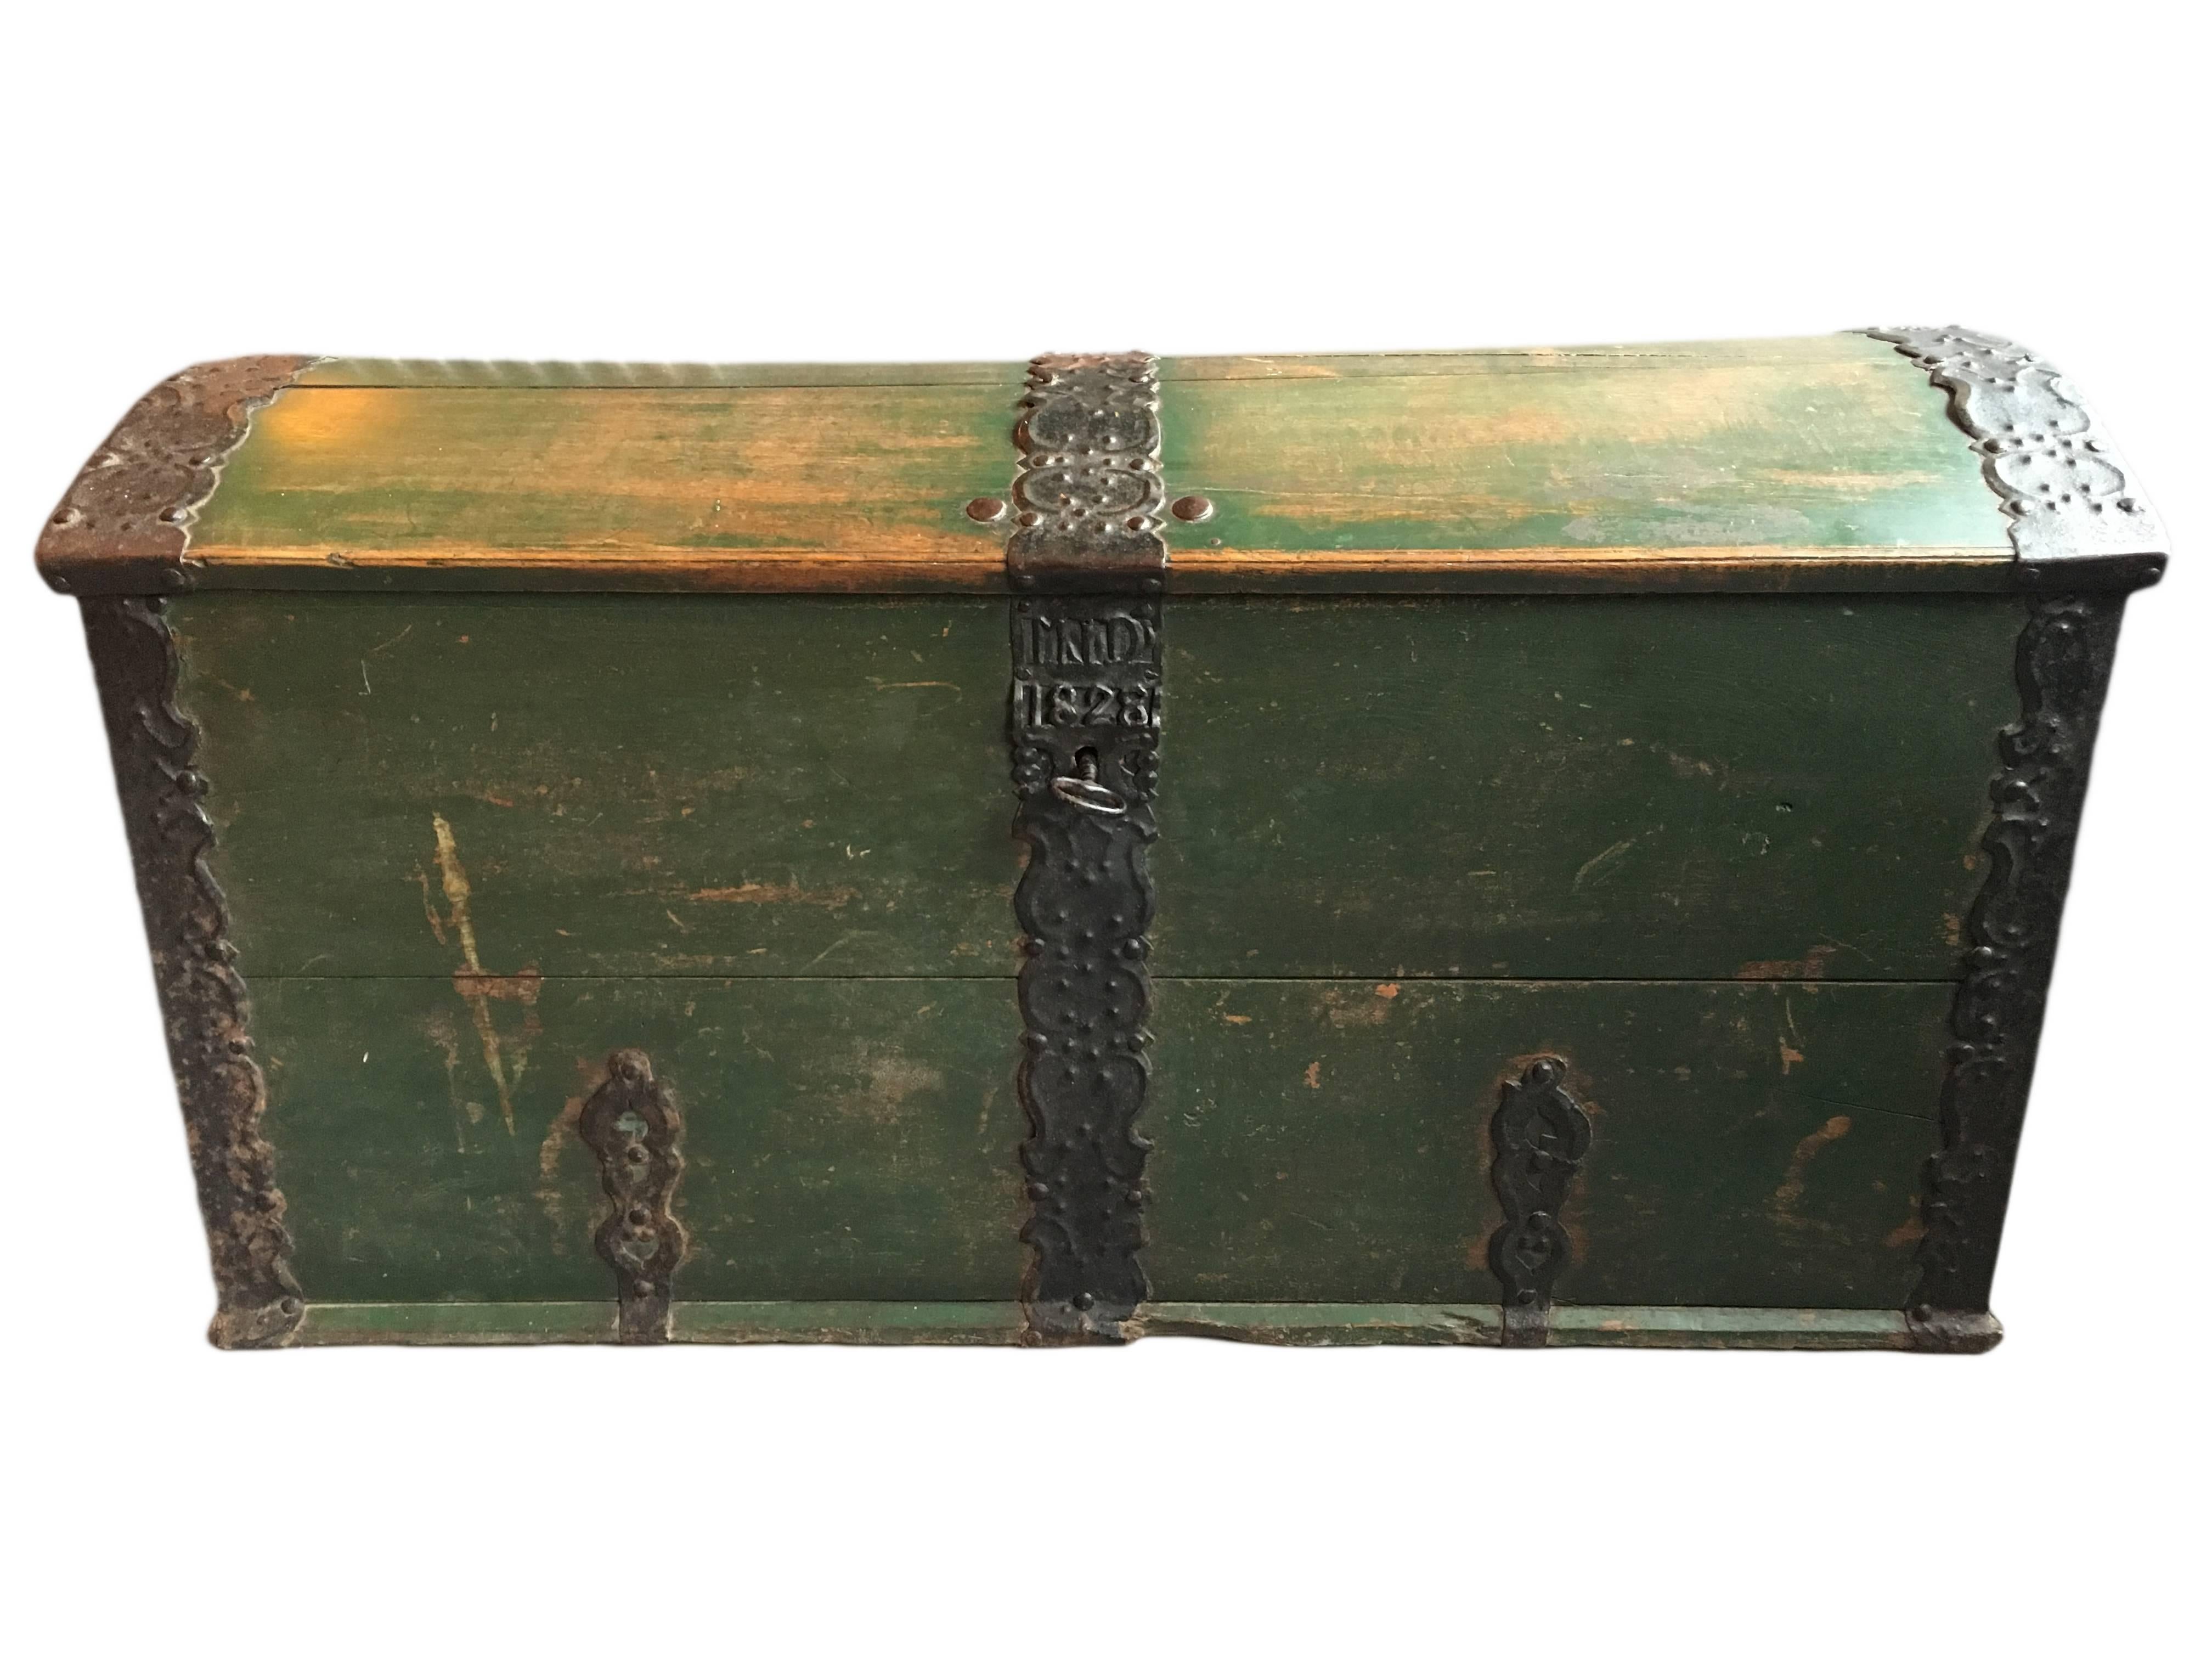 Very large antique Folk Art painted Scandinavian oak trunk dated 1828. All handwrought metal work with original functioning key and lock. An impressive and substantial piece of useful decorative furniture.